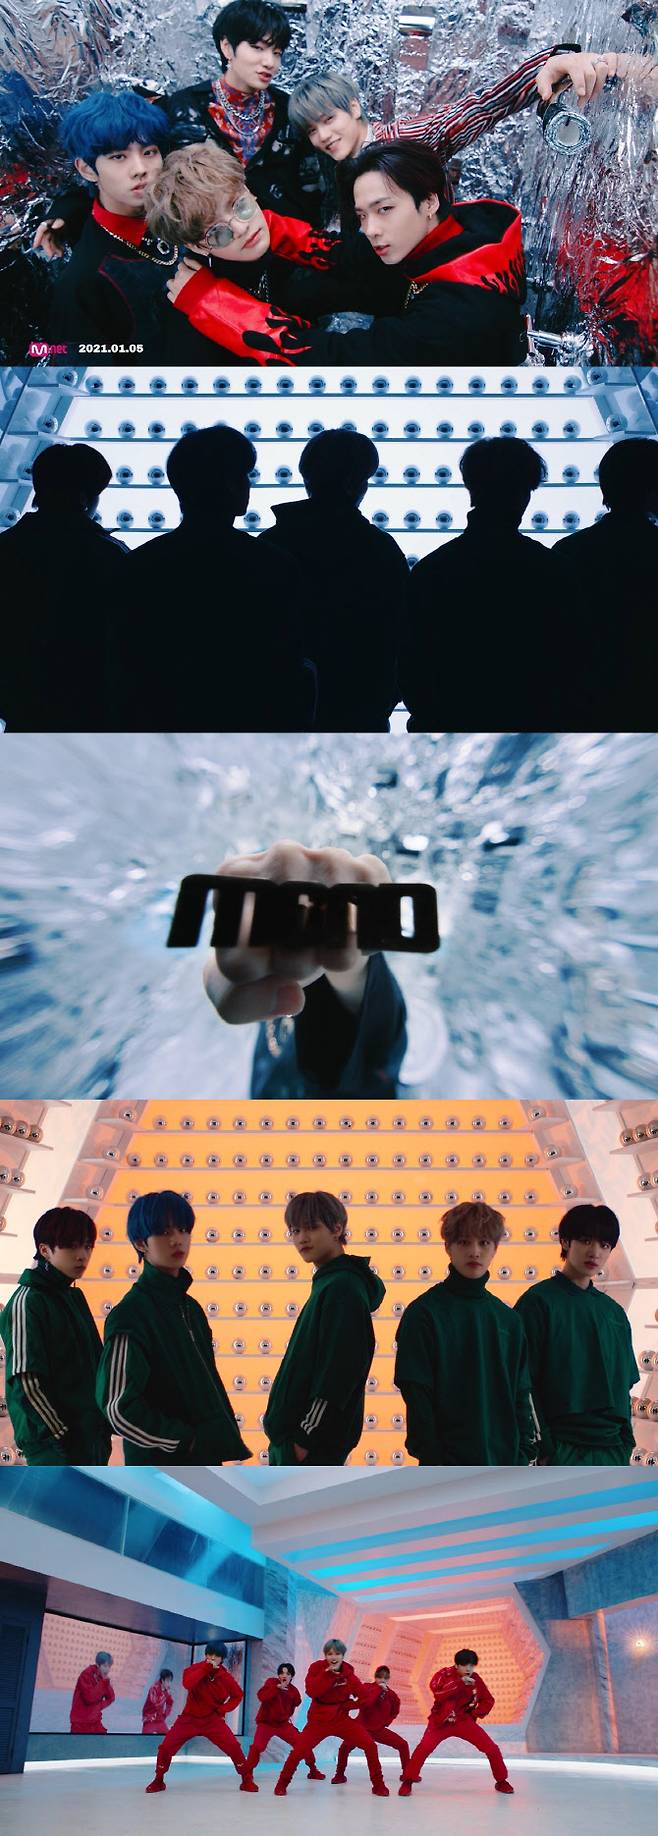 Two Music Video Teasers for the mini-second album MCND AGE title song Udangtang (Crush) were posted on the official YouTube channel of MCND at midnight on the 6th.If MCND made both hip and charismatic in the first Teaser opened on the last two days, the second Teaser caught the attention with a playful villain.In addition, an indispensable performance scene will appear when MCND comes, raising expectations for the main part of the Udangtang Music Video, which will be released at midnight on the 8th.MCND AGE is a new album released by MCND in about five months after the mini 1st album EARTH AGE in August.If EARTH AGE is the story of five boys who came to the Blue Star Earth, which they longed for on the alien planet Kepler-1649c, MCND AGE has a strong aspiration that MCNDs arriving on Earth will open their time.Seven colorful tracks were included on the album, and member Castle Jay participated in the title song Udangtang and the song PLAYER, which improved the completeness of the album.In addition, Outro ;  added only MCND color by taking on lyrics, compositions and arrangements.